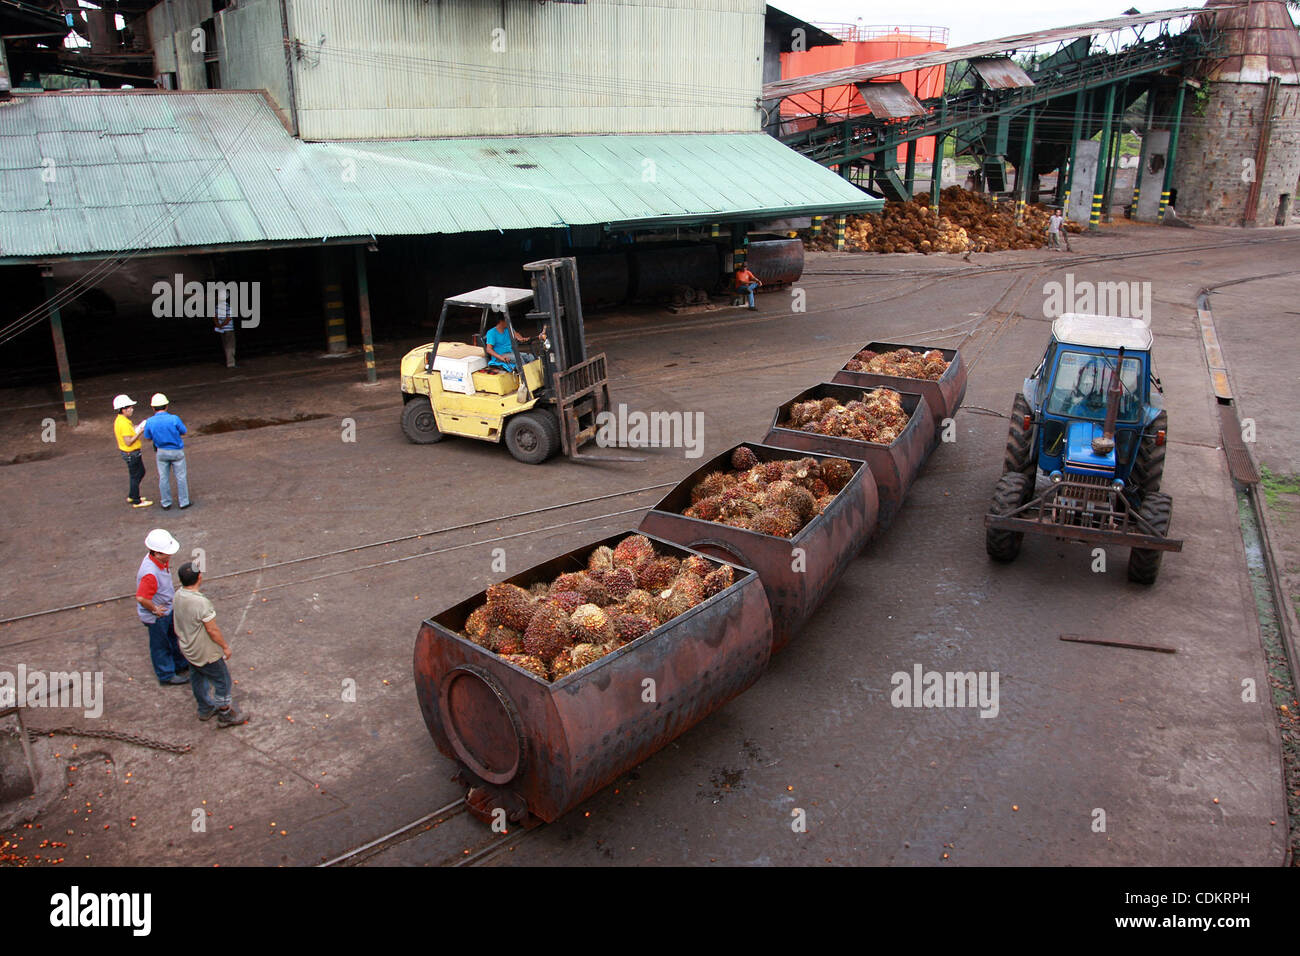 Mar 25, 2011 - Isulan, Mindanao Island, Philippines - Filipino workers are seen at the processing plant for oil palm fruits. Palm oil is considered as important as its other resources as it aims for growth. Asian firms like those in Indonesia and Philippines might take the lead in the production of  Stock Photo